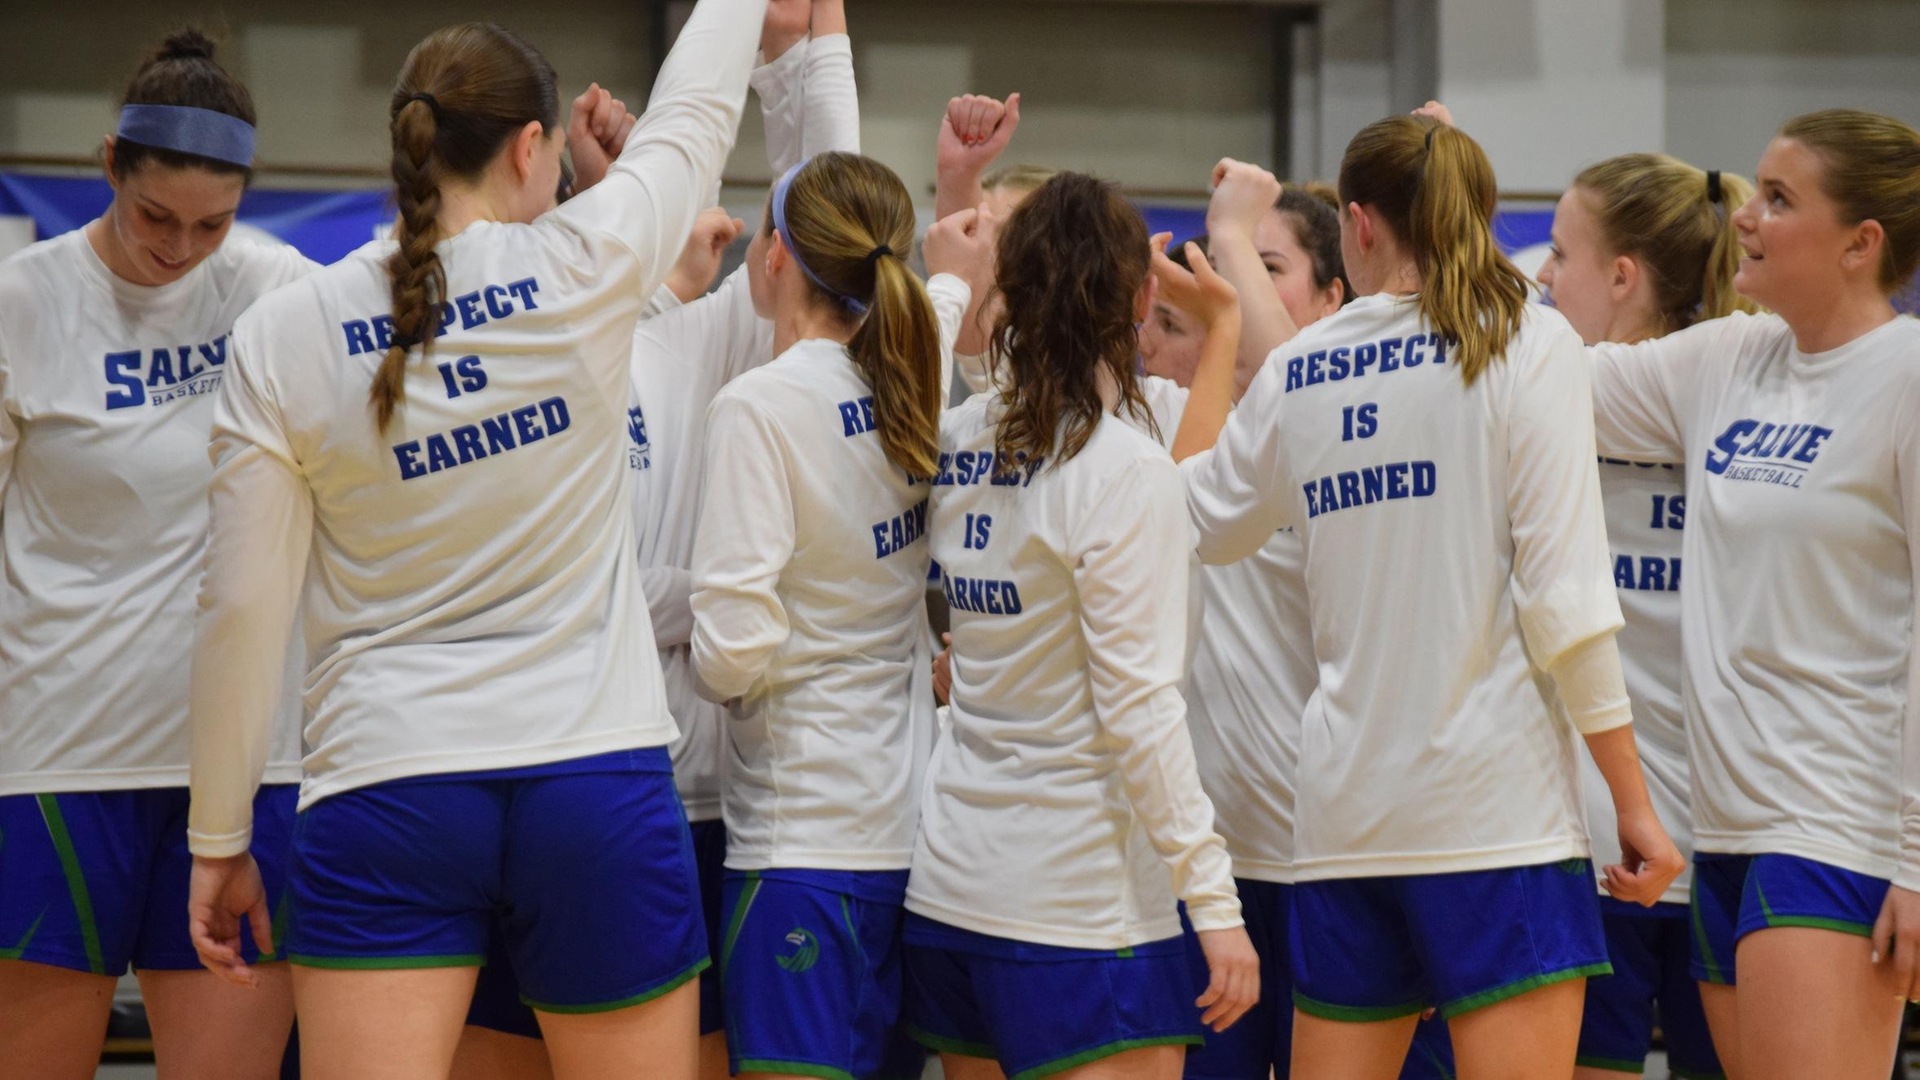 Salve Regina women's basketball earned the respect of Wheaton College when the Seahawks won with a dominant 4th quarter. (Photo by Ed Habershaw '03M)